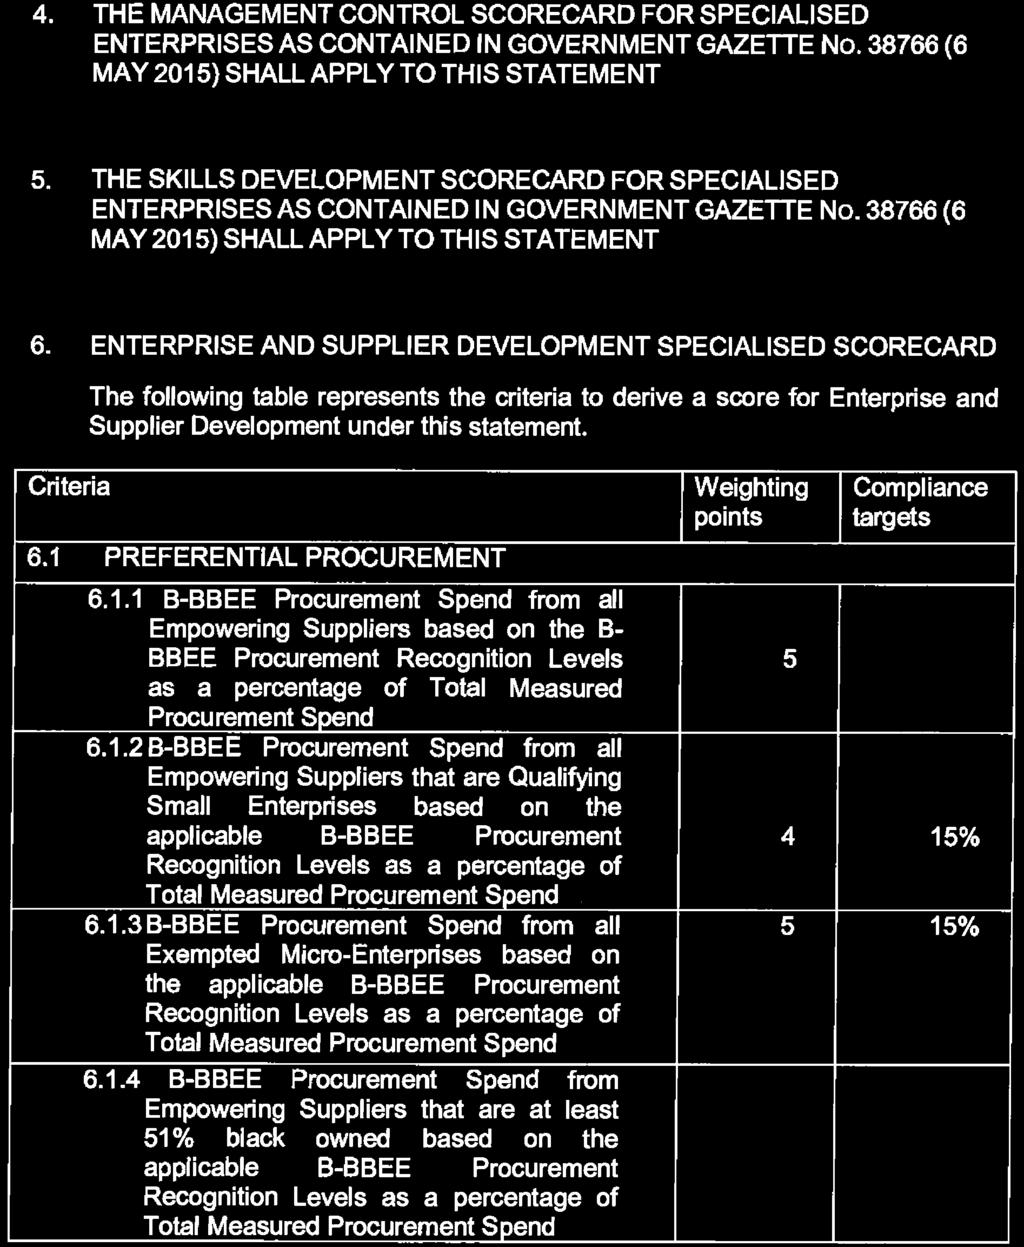 22 No. 39726 GOVERNMENT GAZETTE, 24 FEBRUARY 2016 4. THE MANAGEMENT CONTROL SCORECARD FOR SPECIALISED ENTERPRISES AS CONTAINED IN GOVERNMENT GAZETTE No.